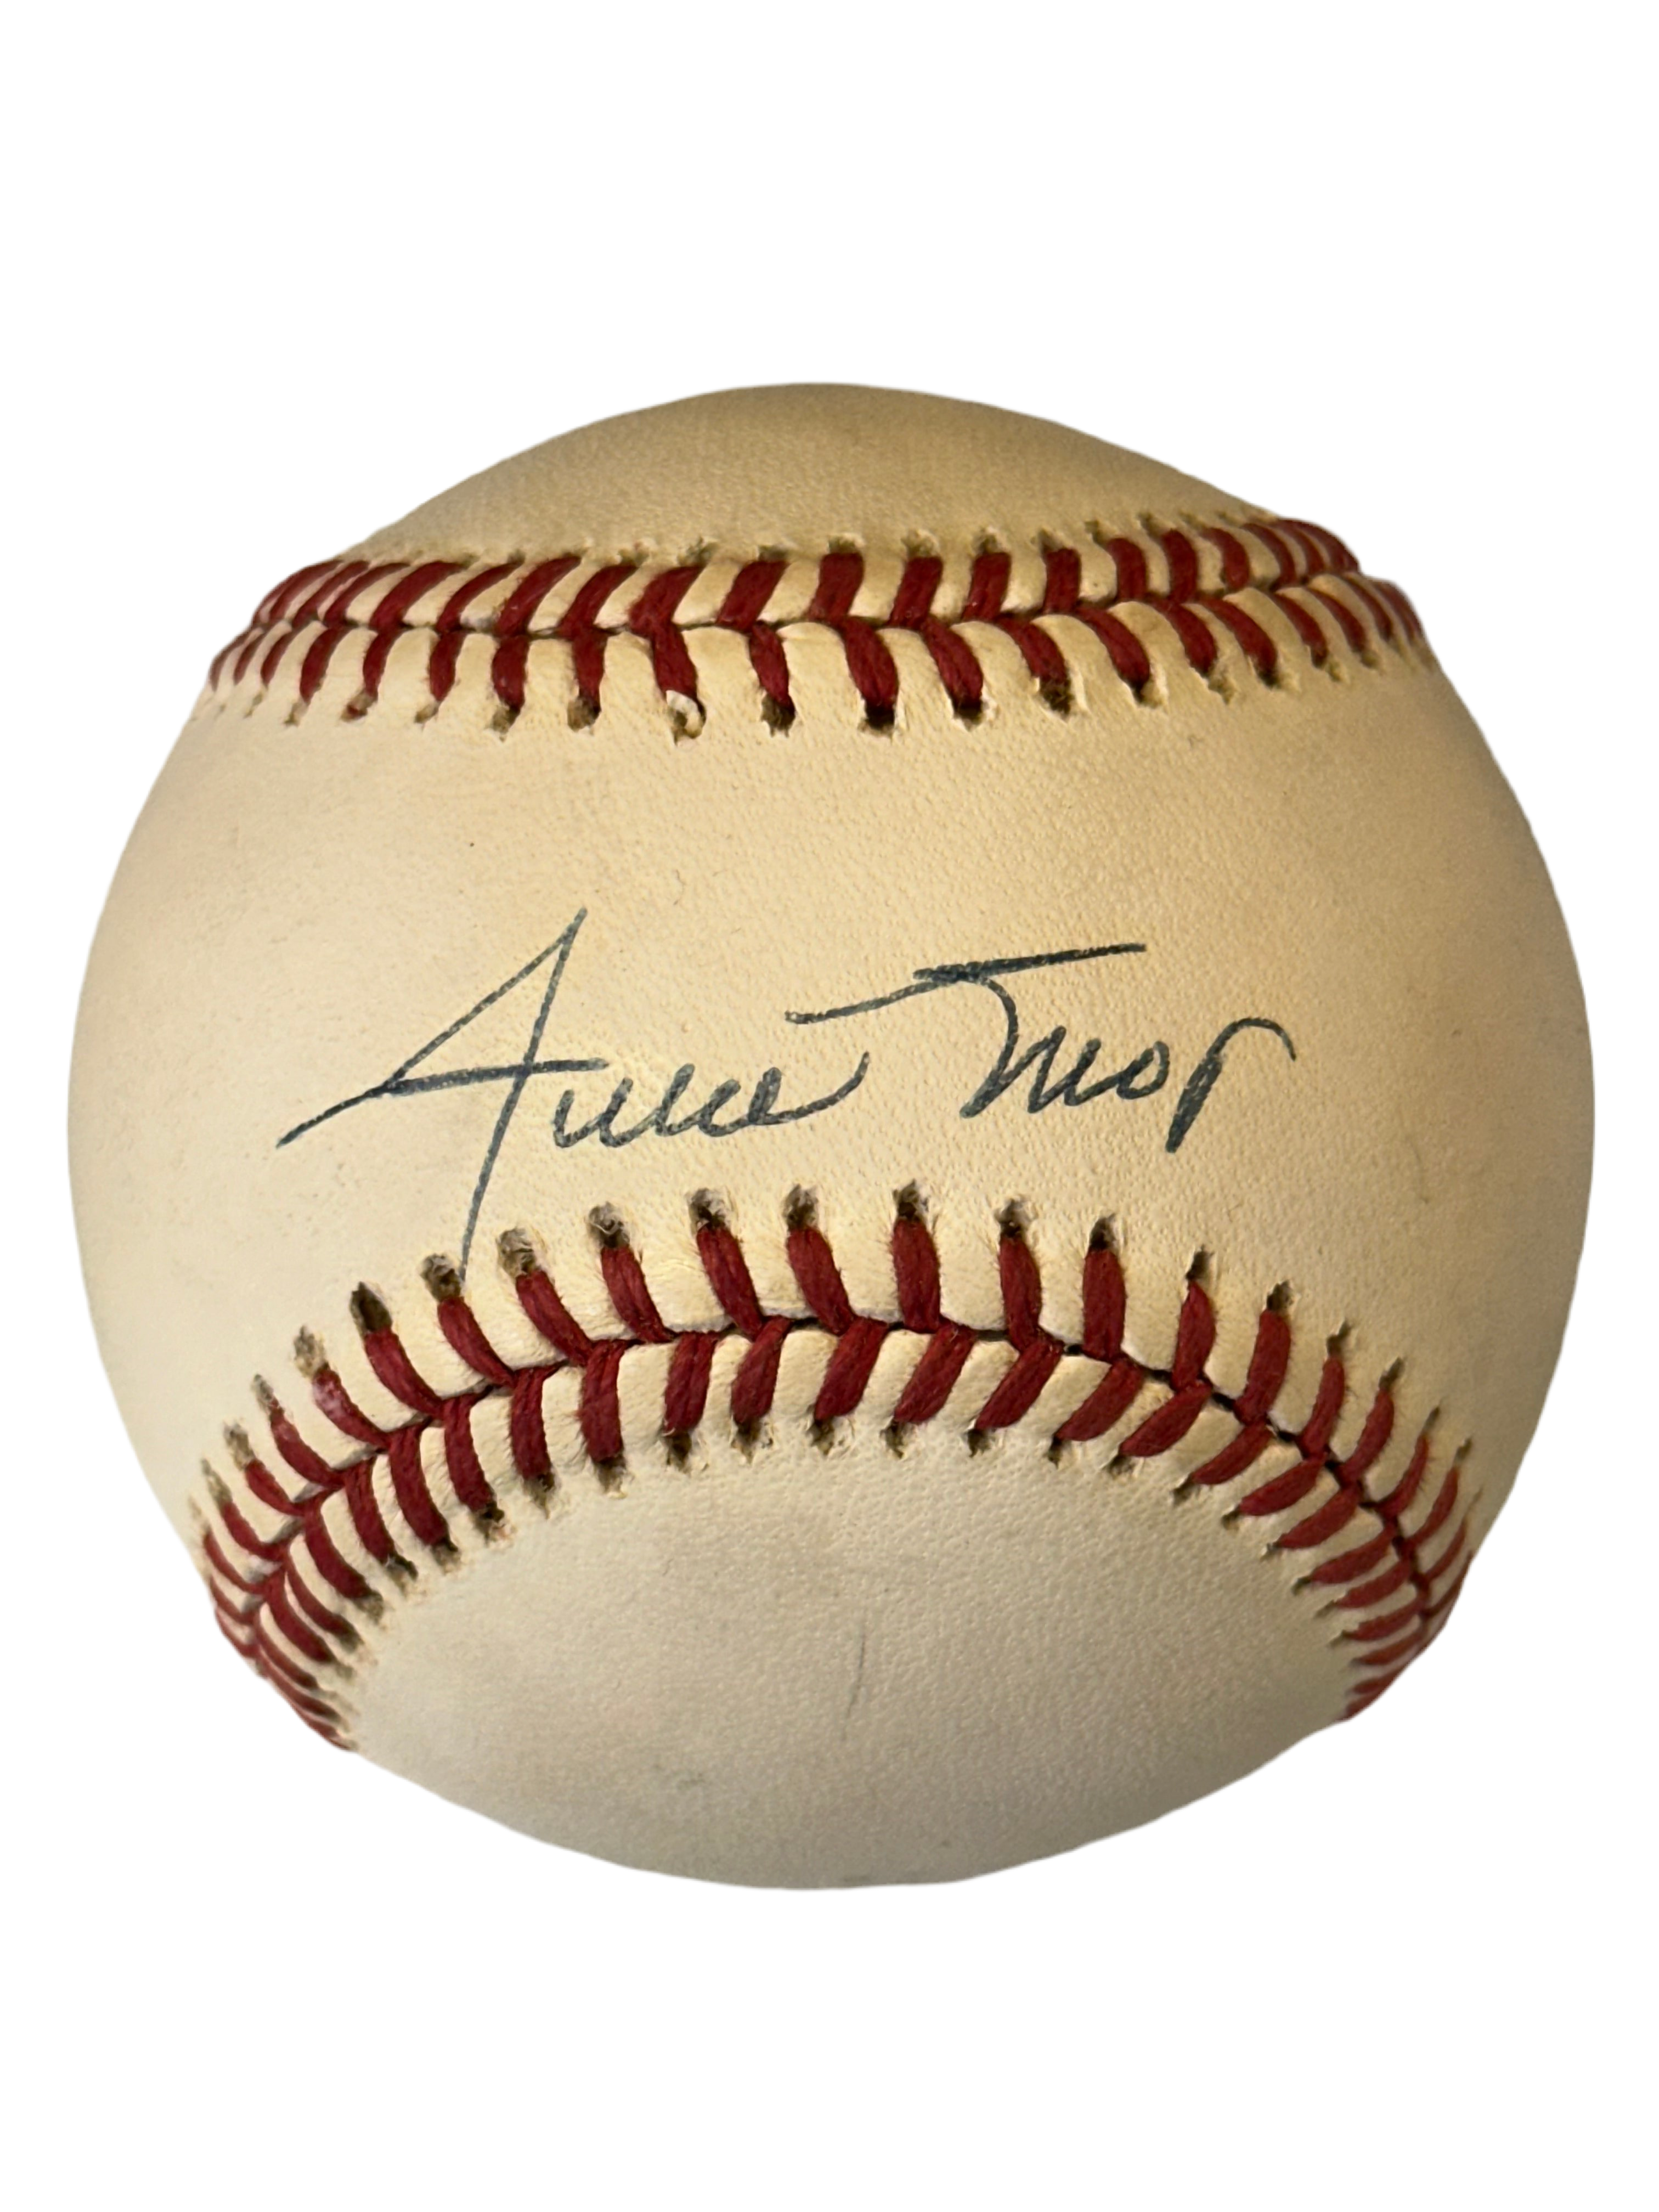 WILLIE MAYS AUTOGRAPH BASEBALL - CERTIFIED BY JSA AUTHENTICATION